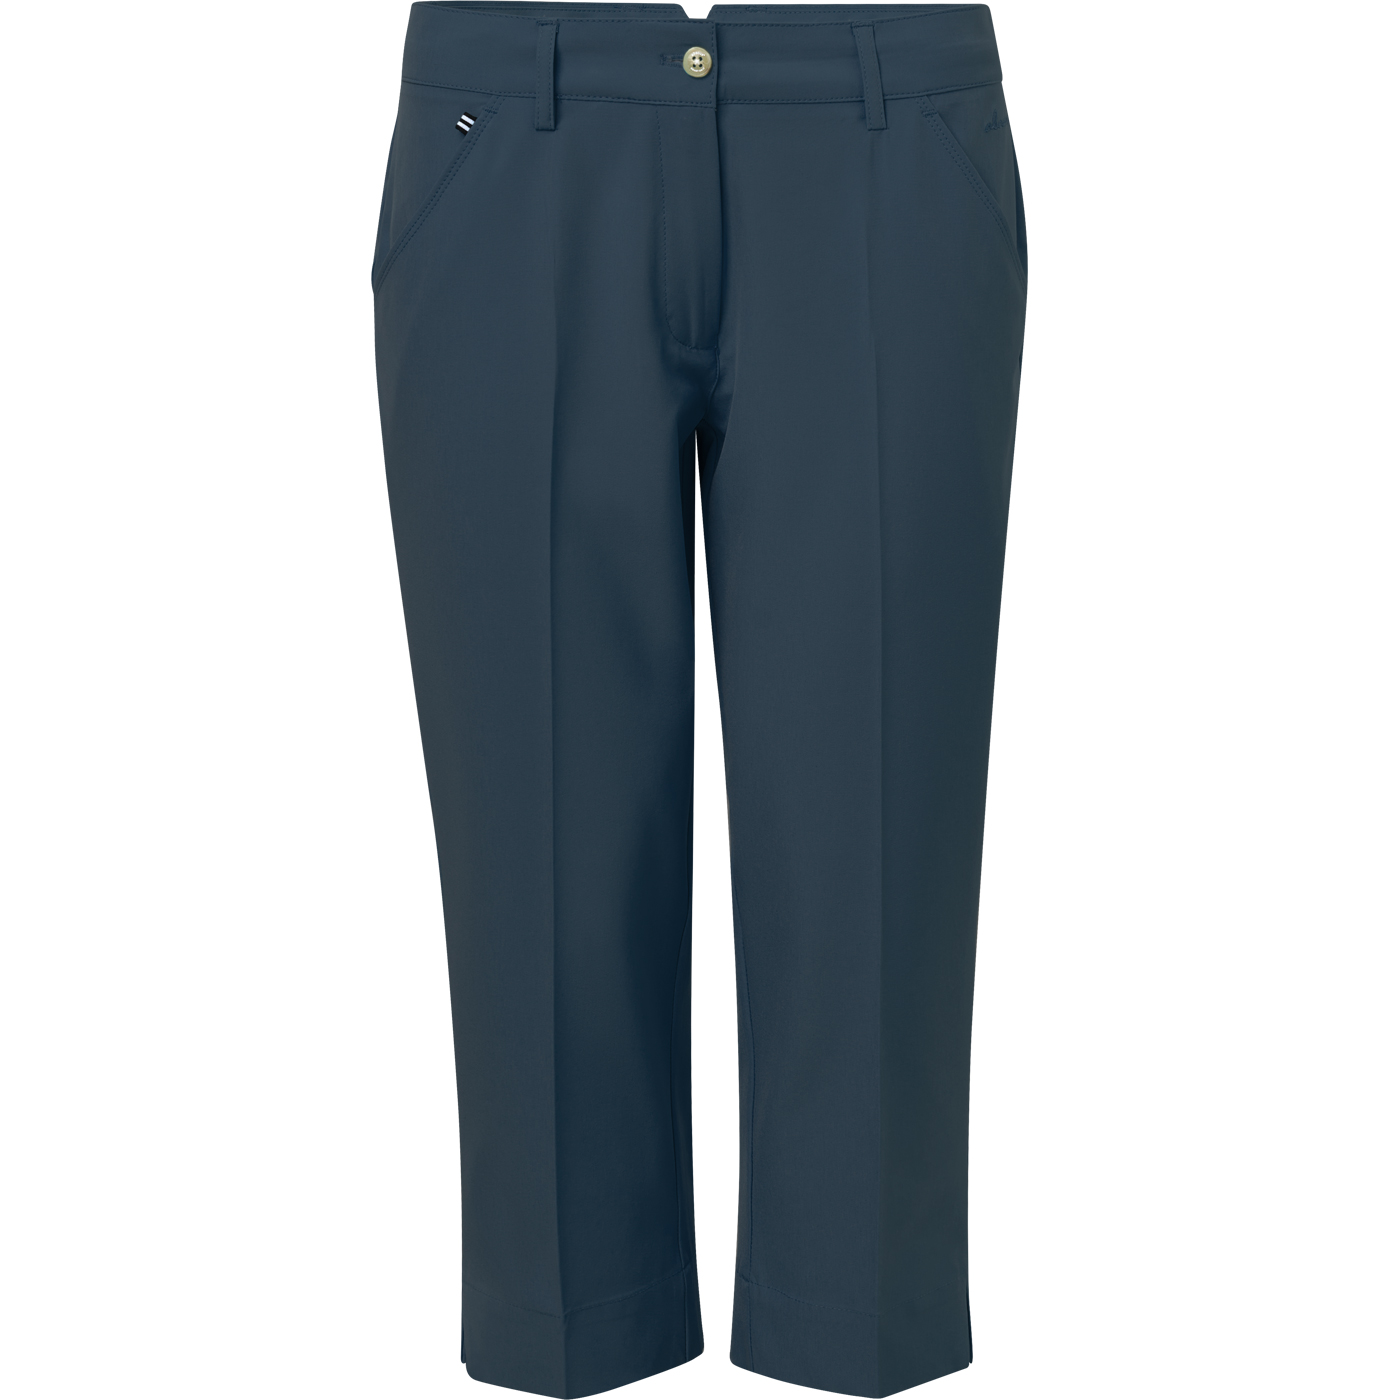 Lds Kildare capri - navy in the group WOMEN / All clothing at Abacus Sportswear (2979300)